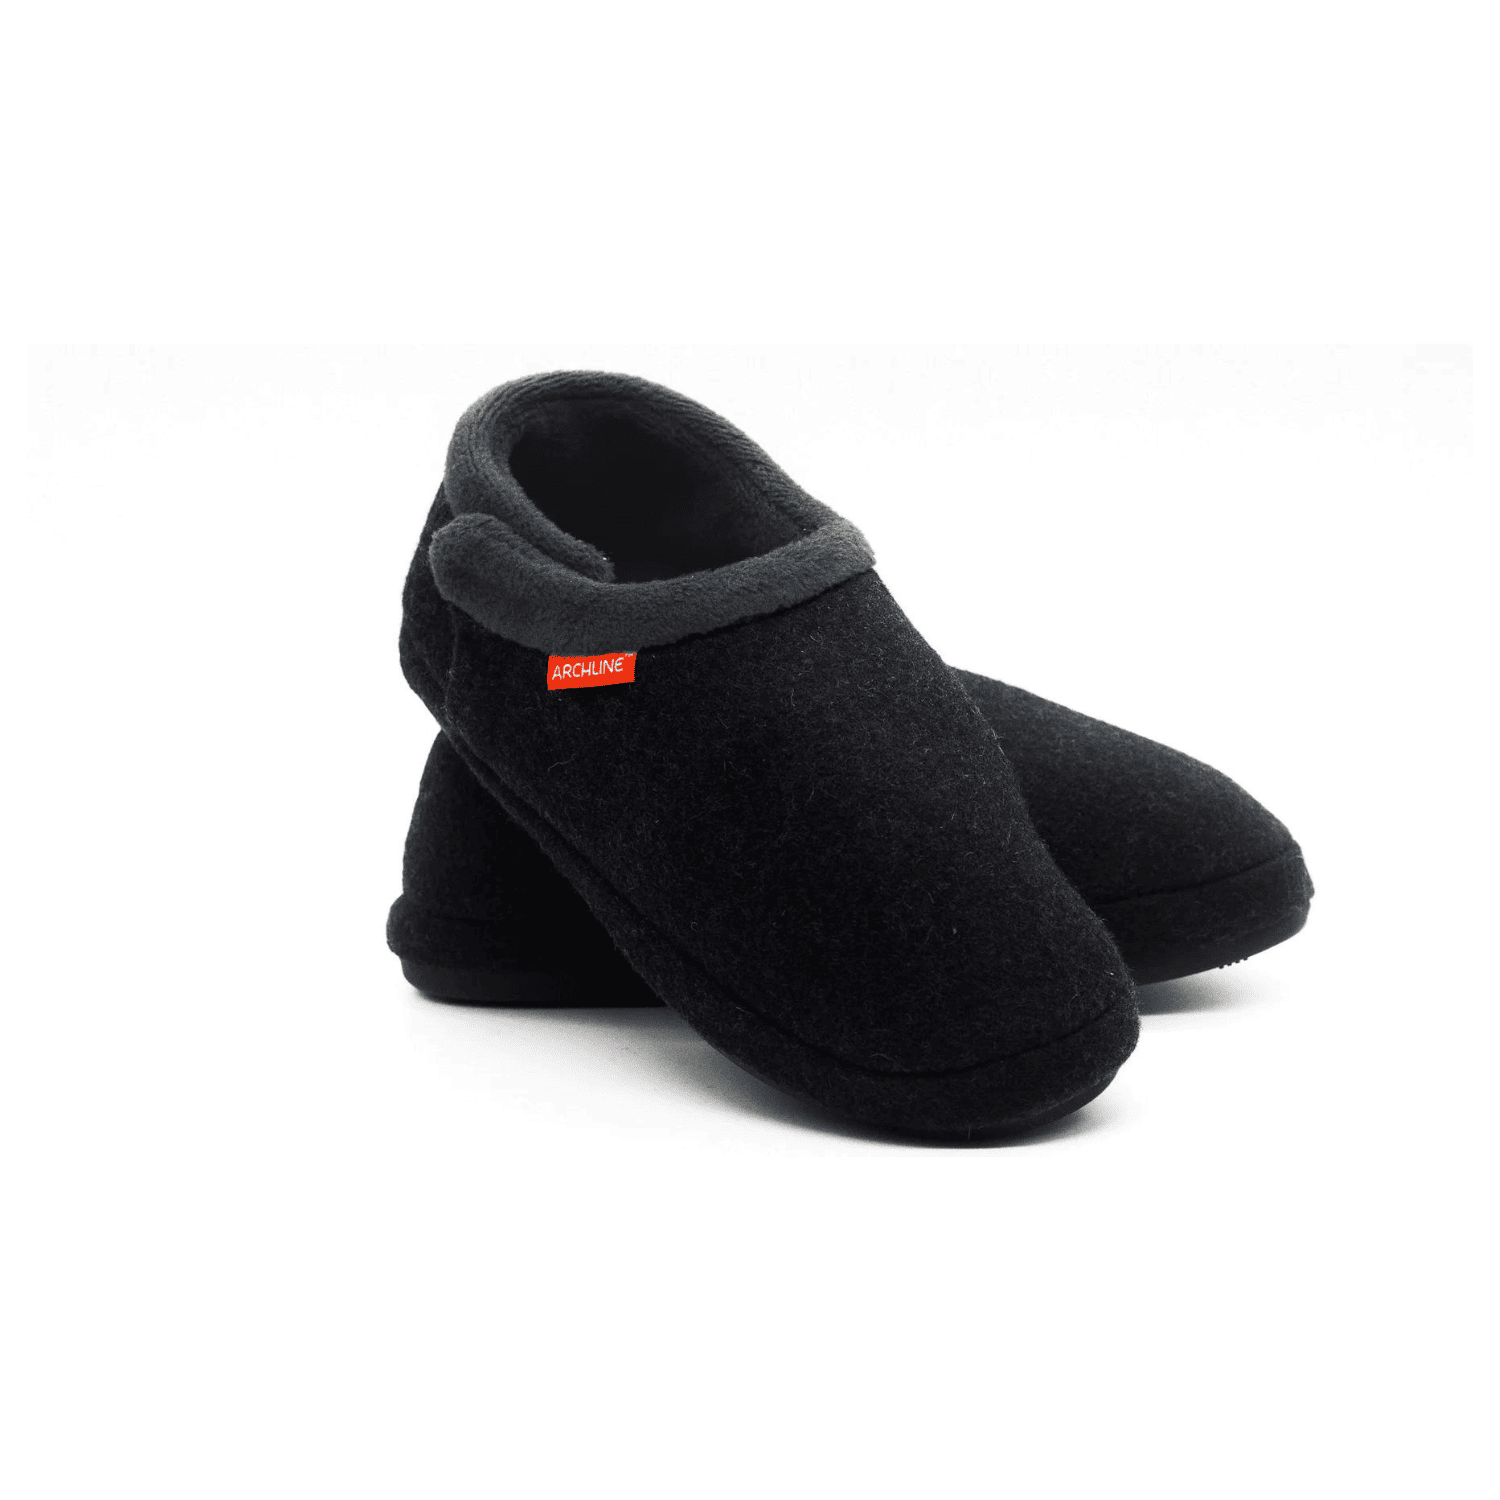 Charcoal Marl Closed + Closed Velcro Style+_